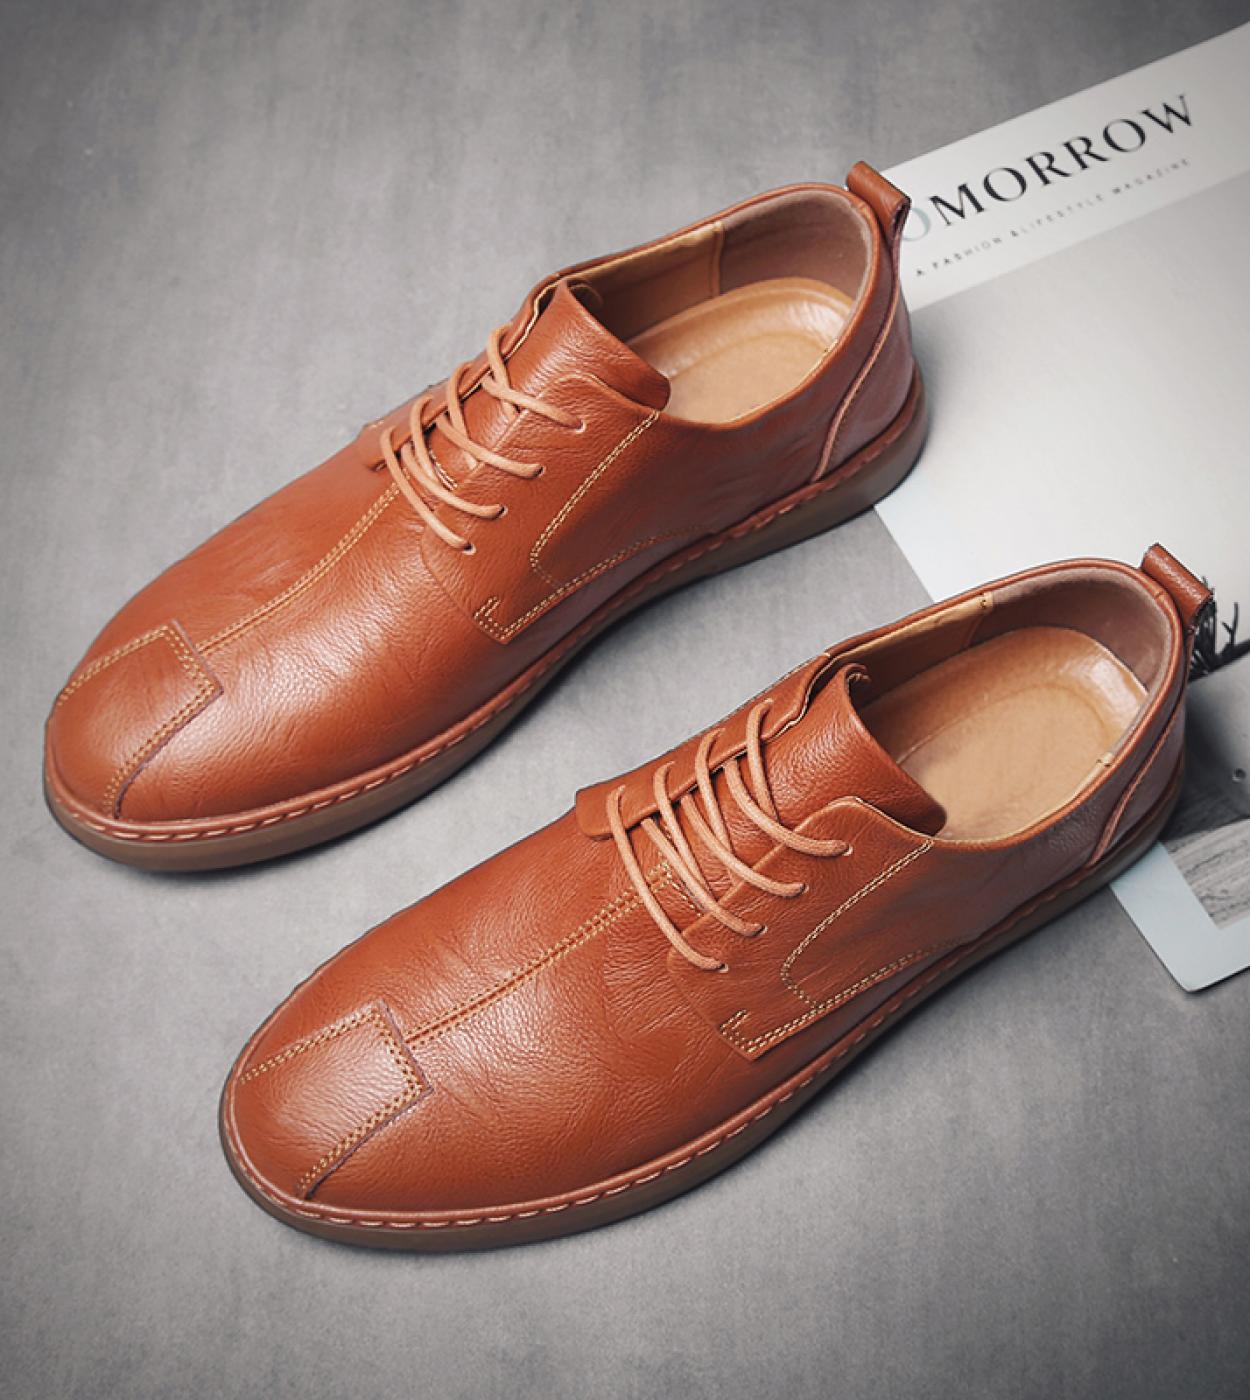 2022 Spring Autumn Casual Leather Shoes Men Brand Lace Up Fashion Shoes Office Bureau Business Shoes Leisure Walk Outdoo